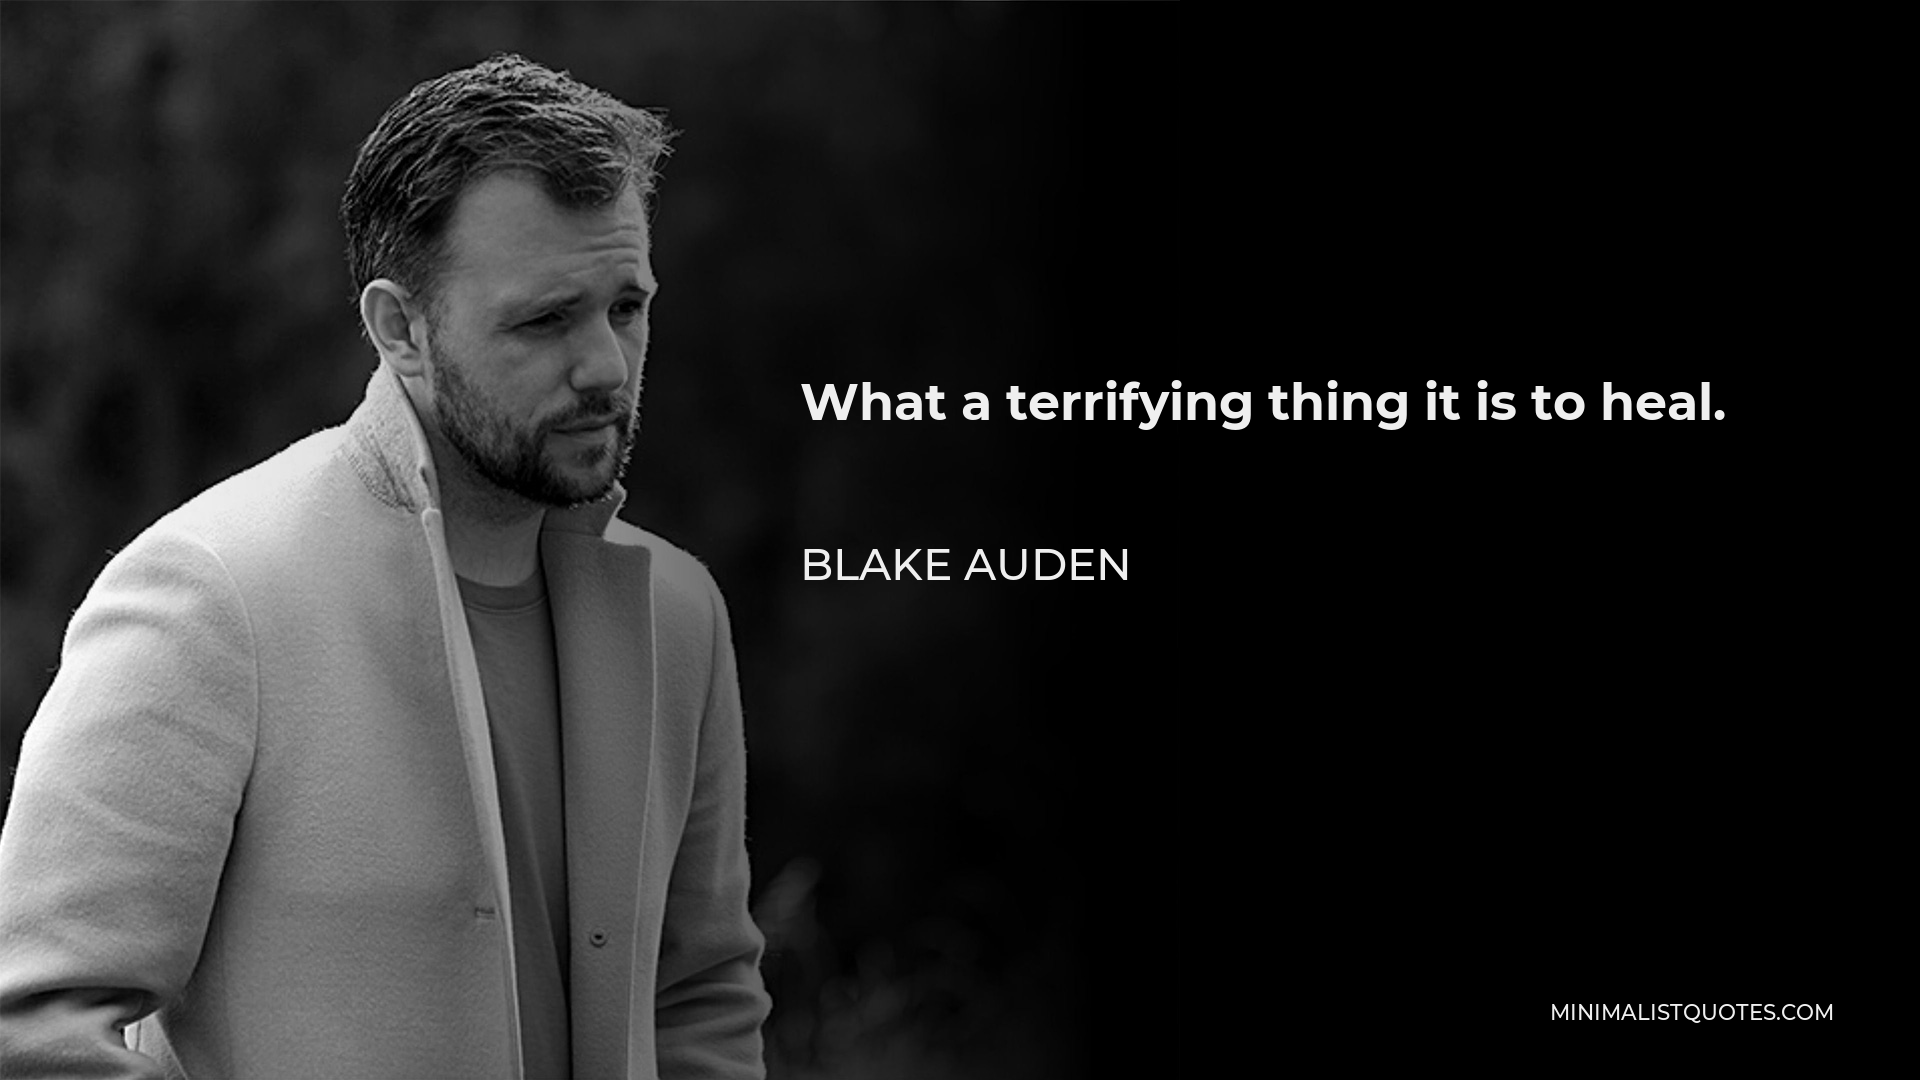 Blake Auden Quote - What a terrifying thing it is to heal.